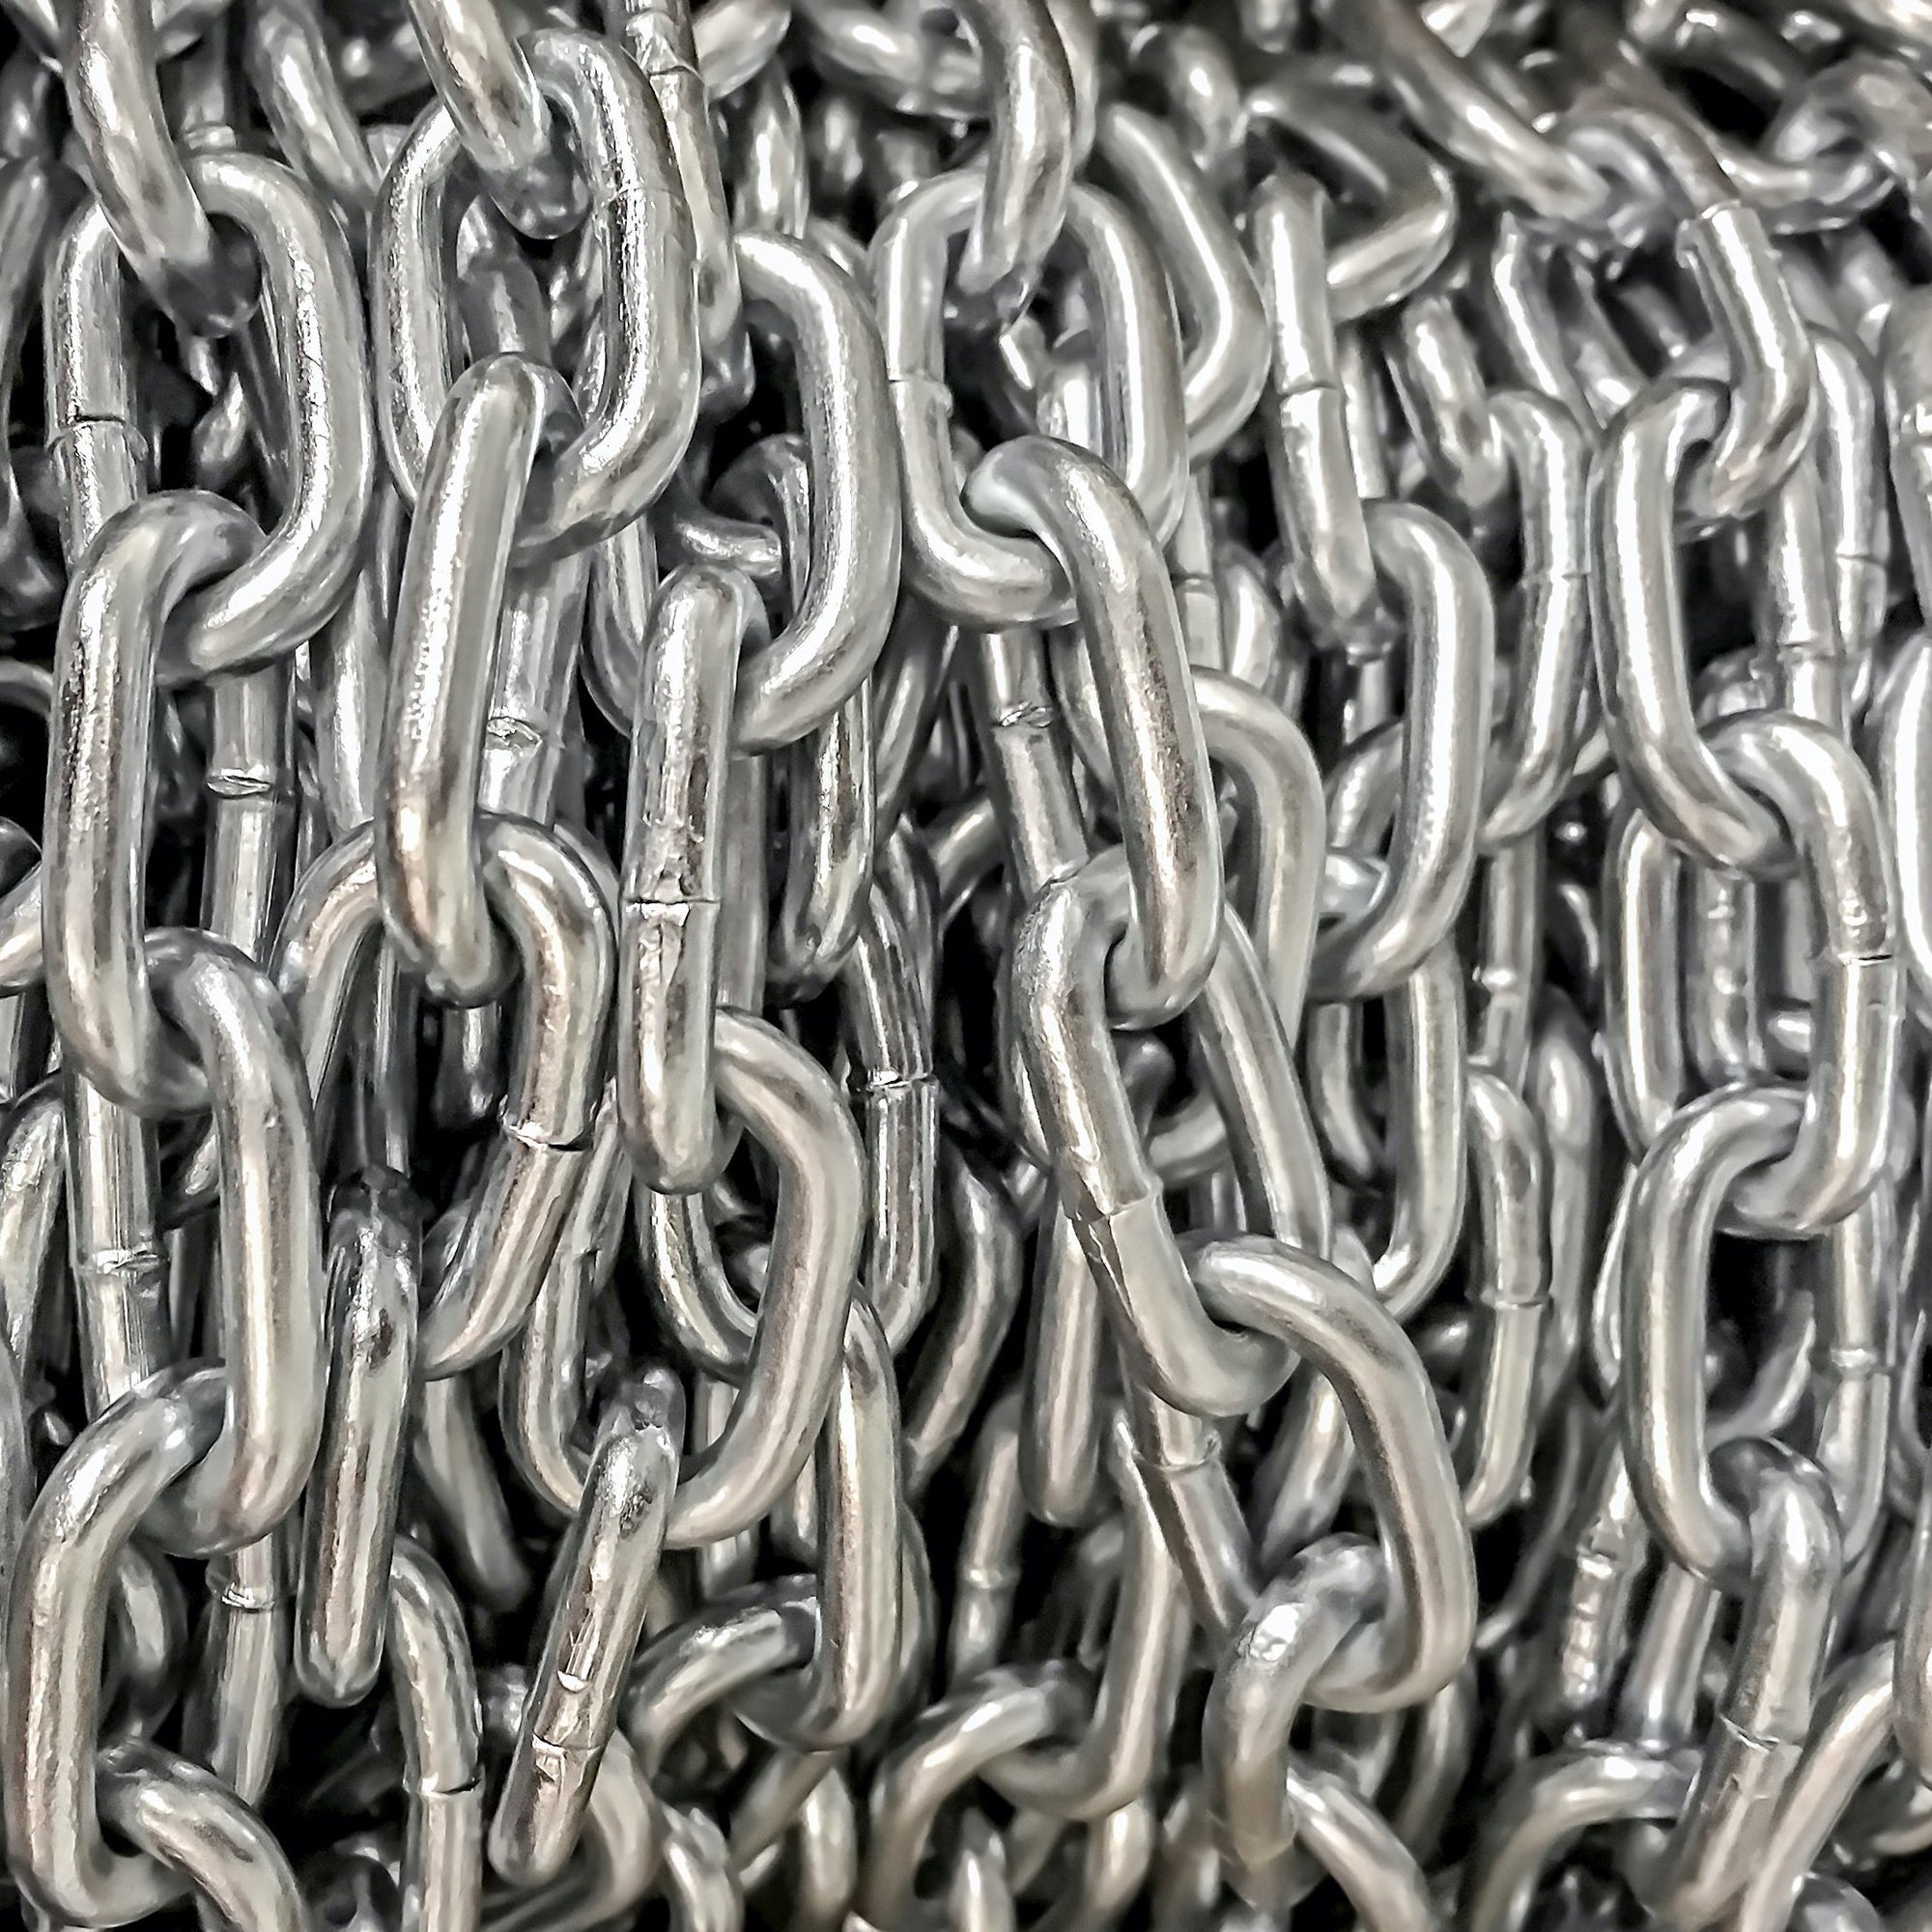 Rows of chain